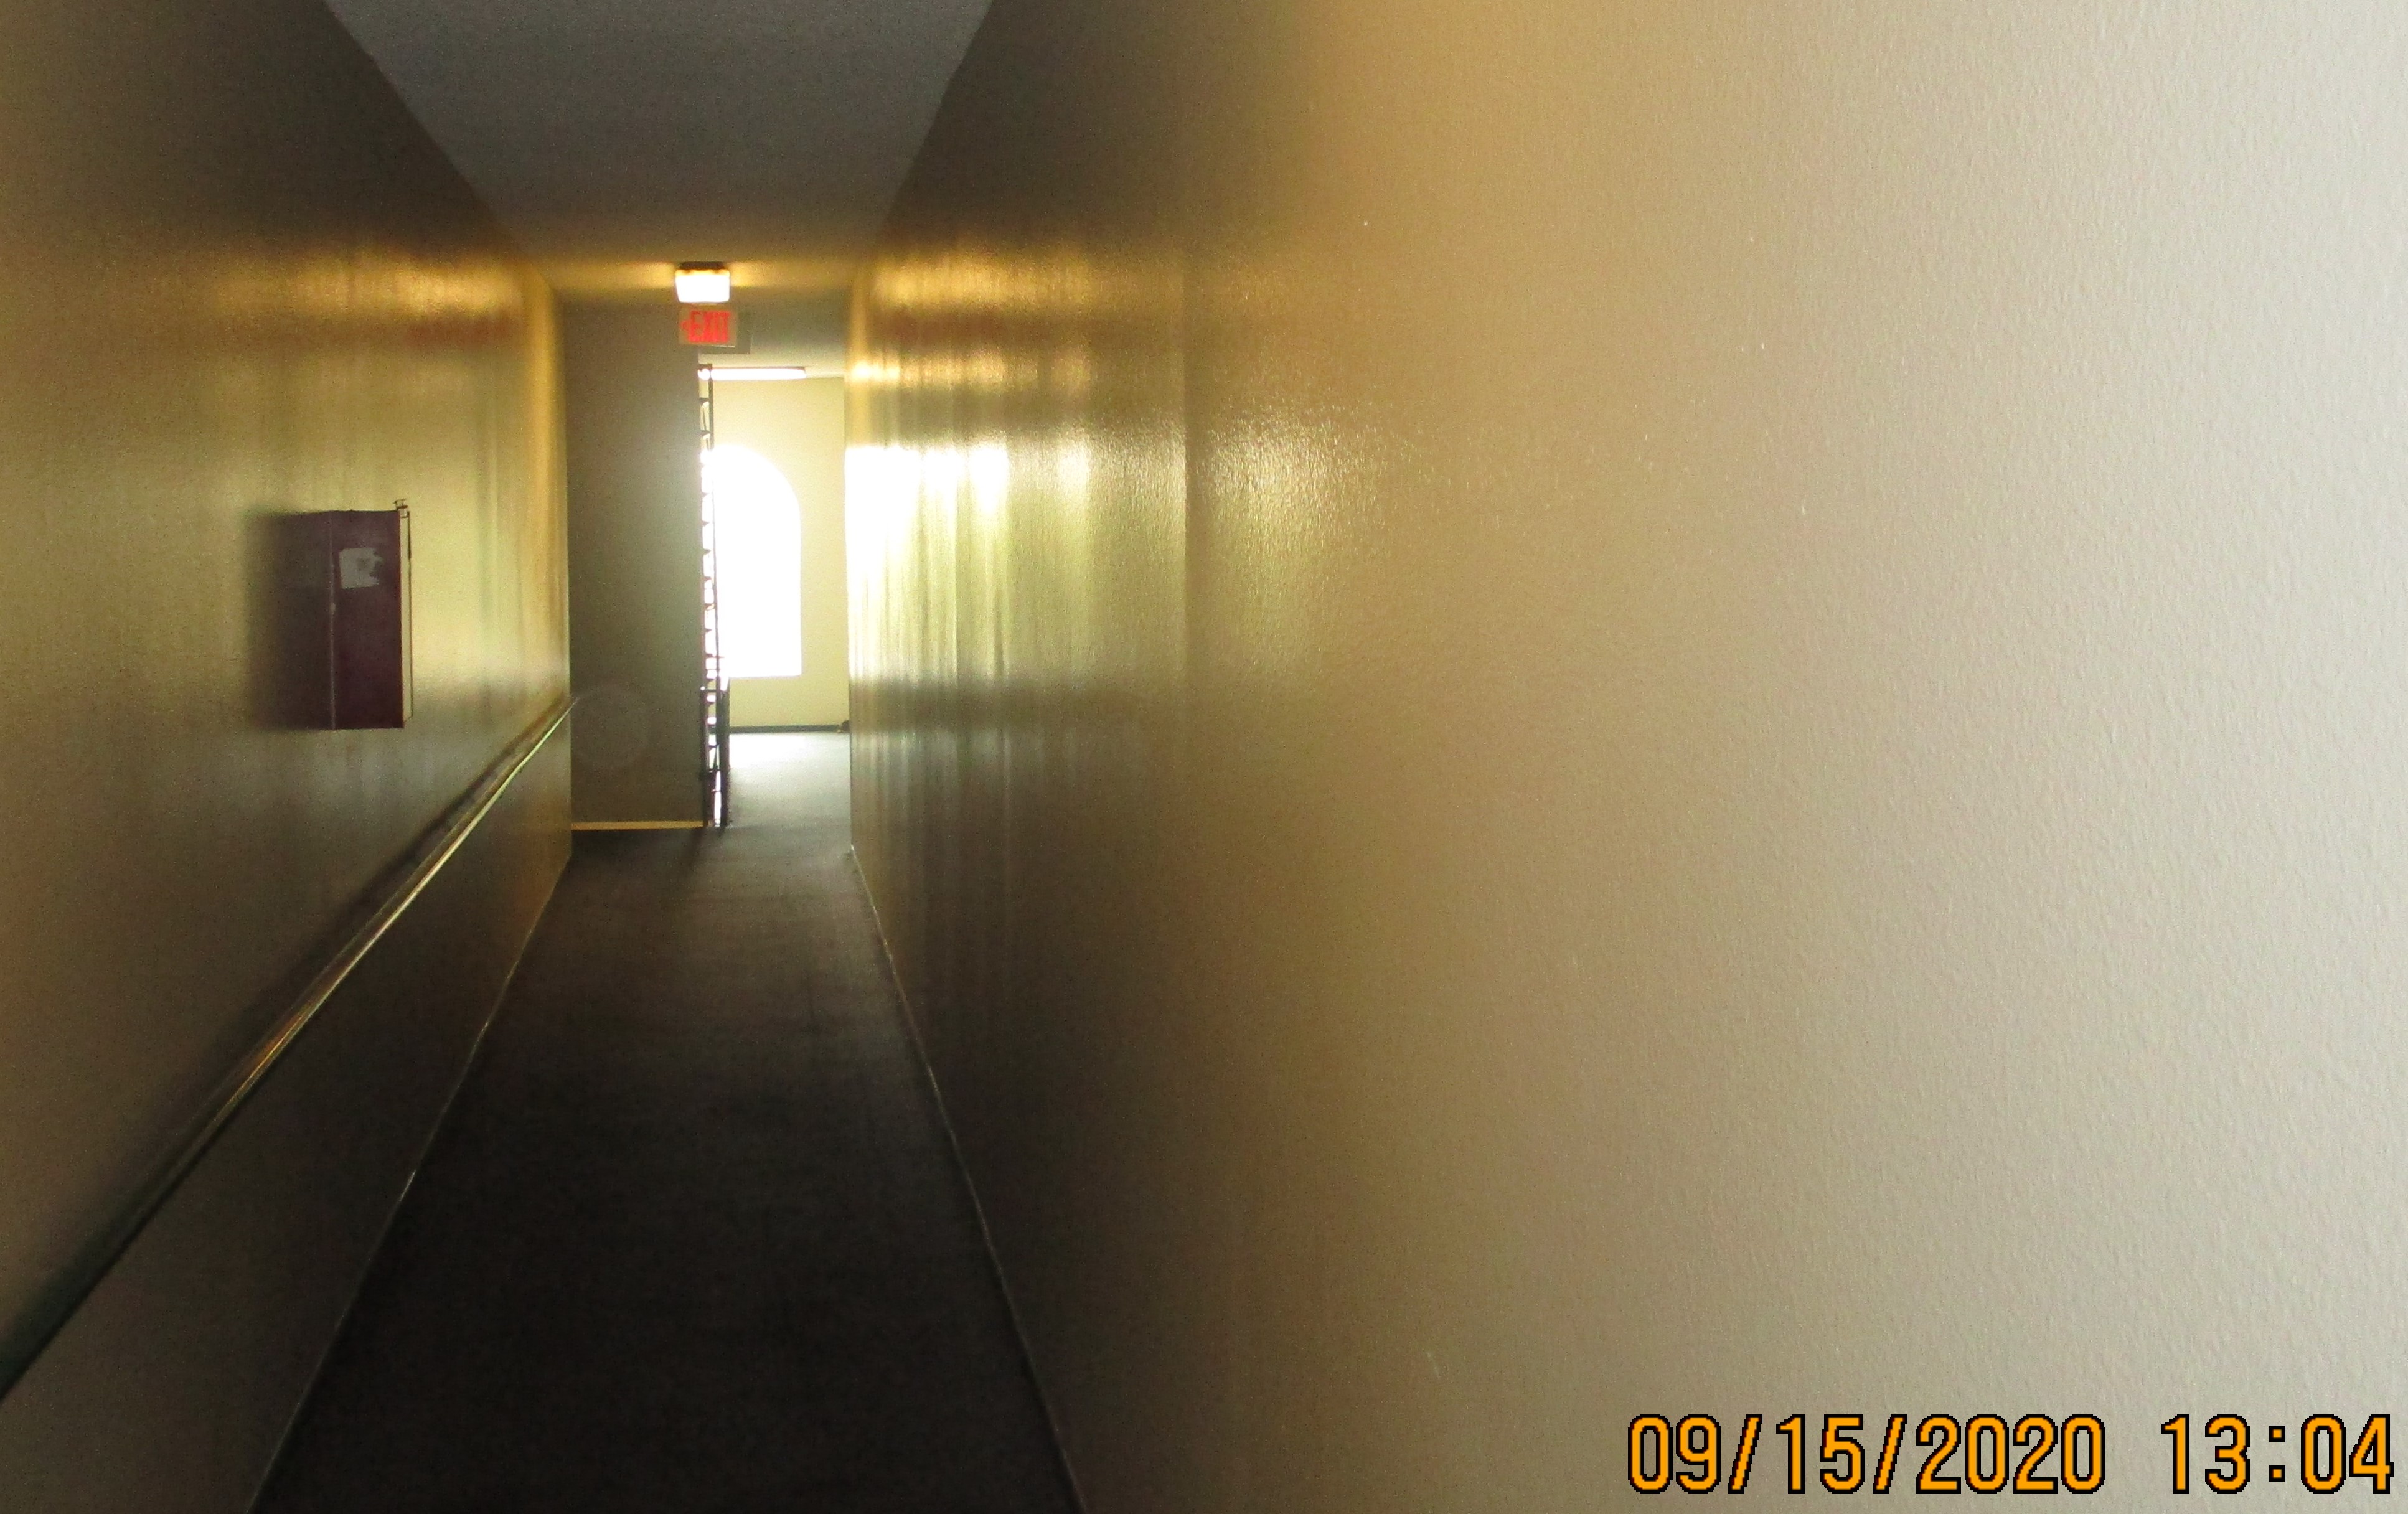 Image of an interior hallway with an exit sign at the end of the hall.